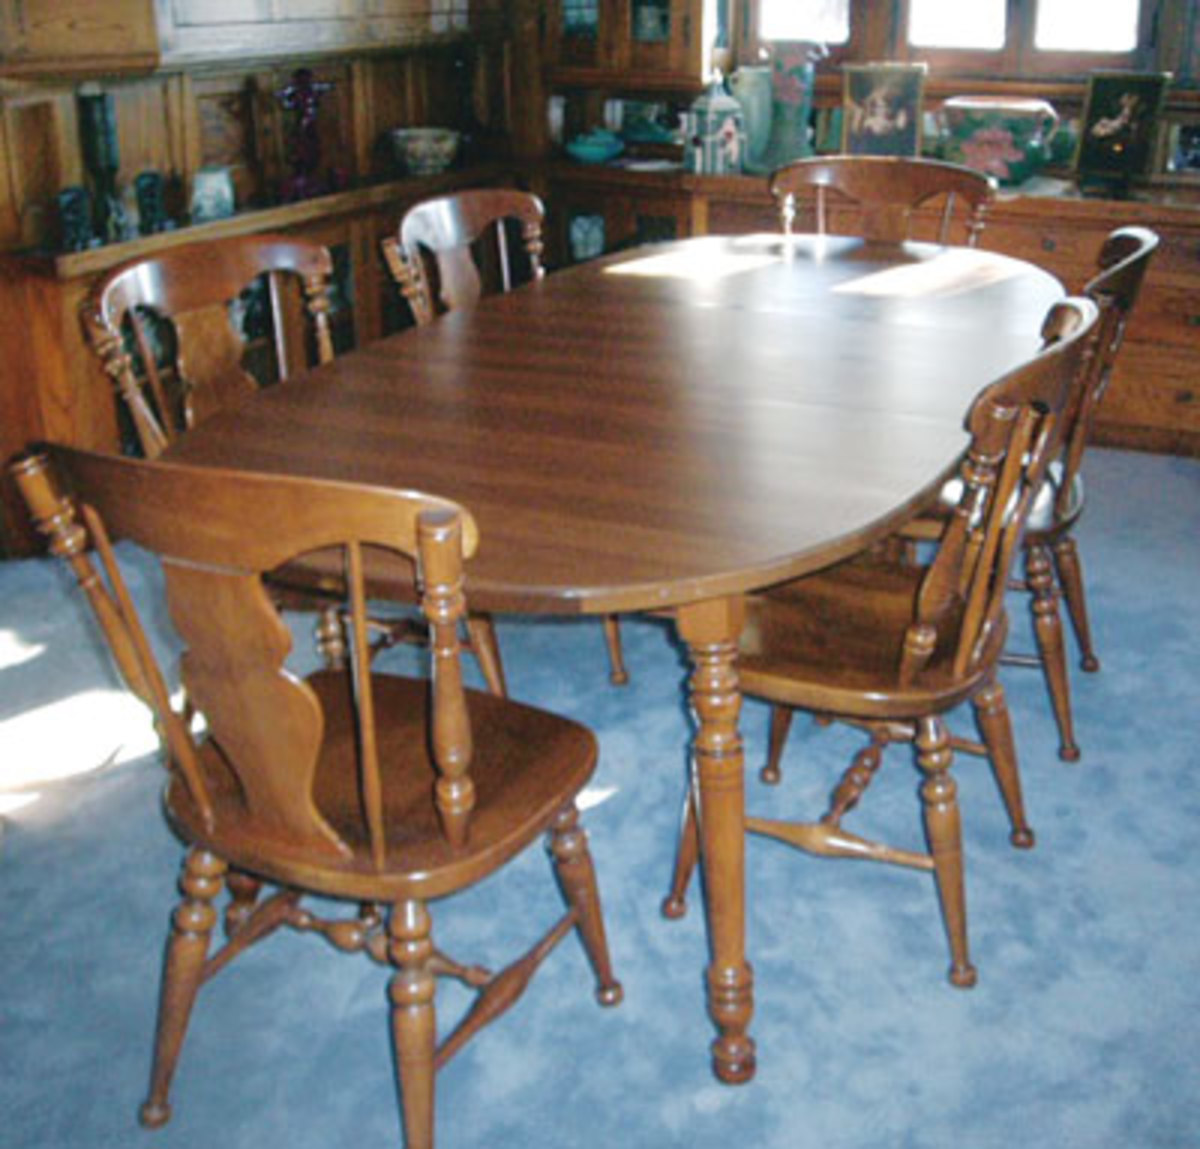 This table, while it seems to match the Heywood-Wakefield chairs and hutch, was actually made by Tell City of Tell City, Ind.